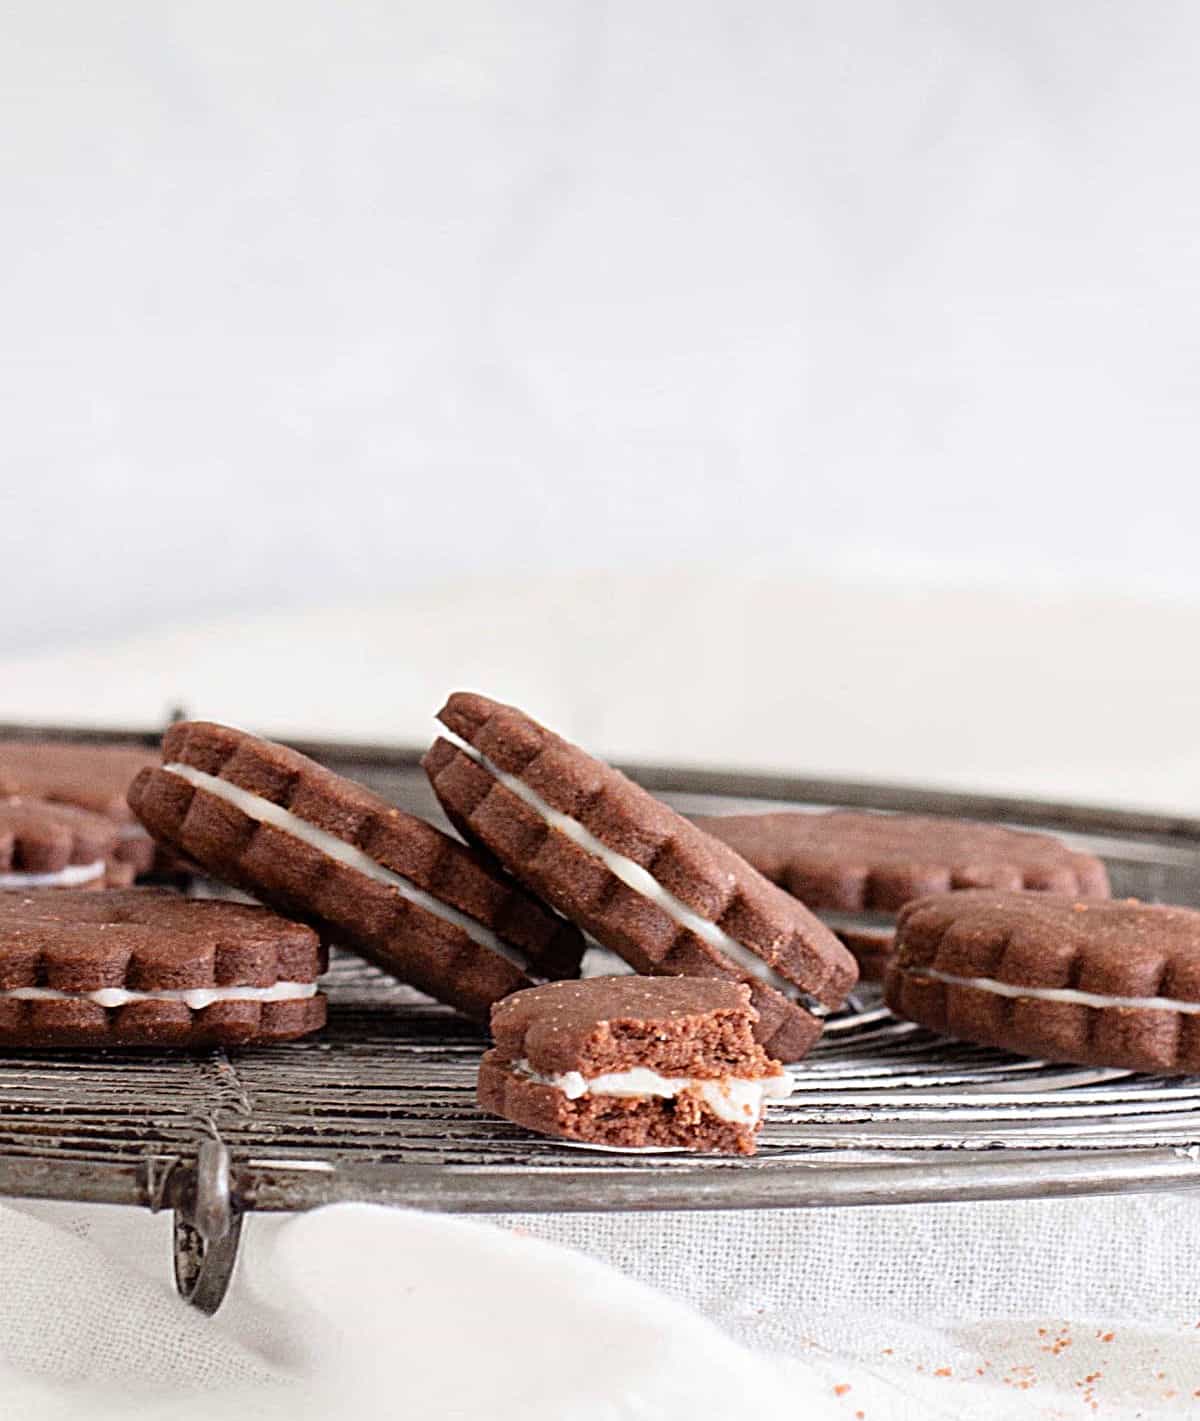 Chocolate sandwich cookies on wire rack, grey white background.